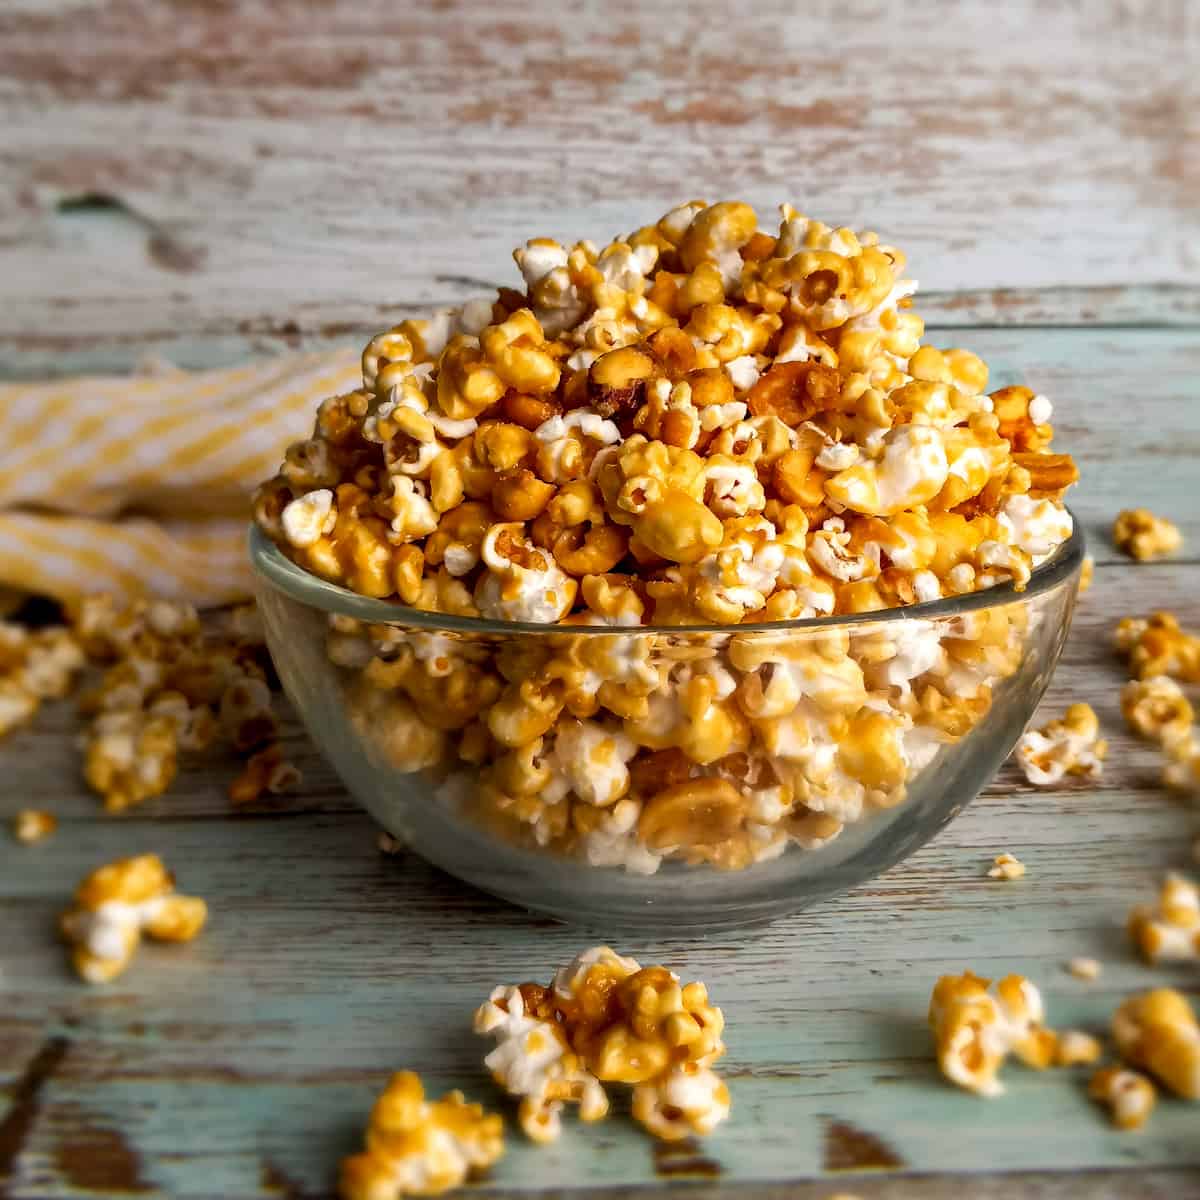 a glass bowl full of Amish caramel popcorn with a few pieces scattered around.